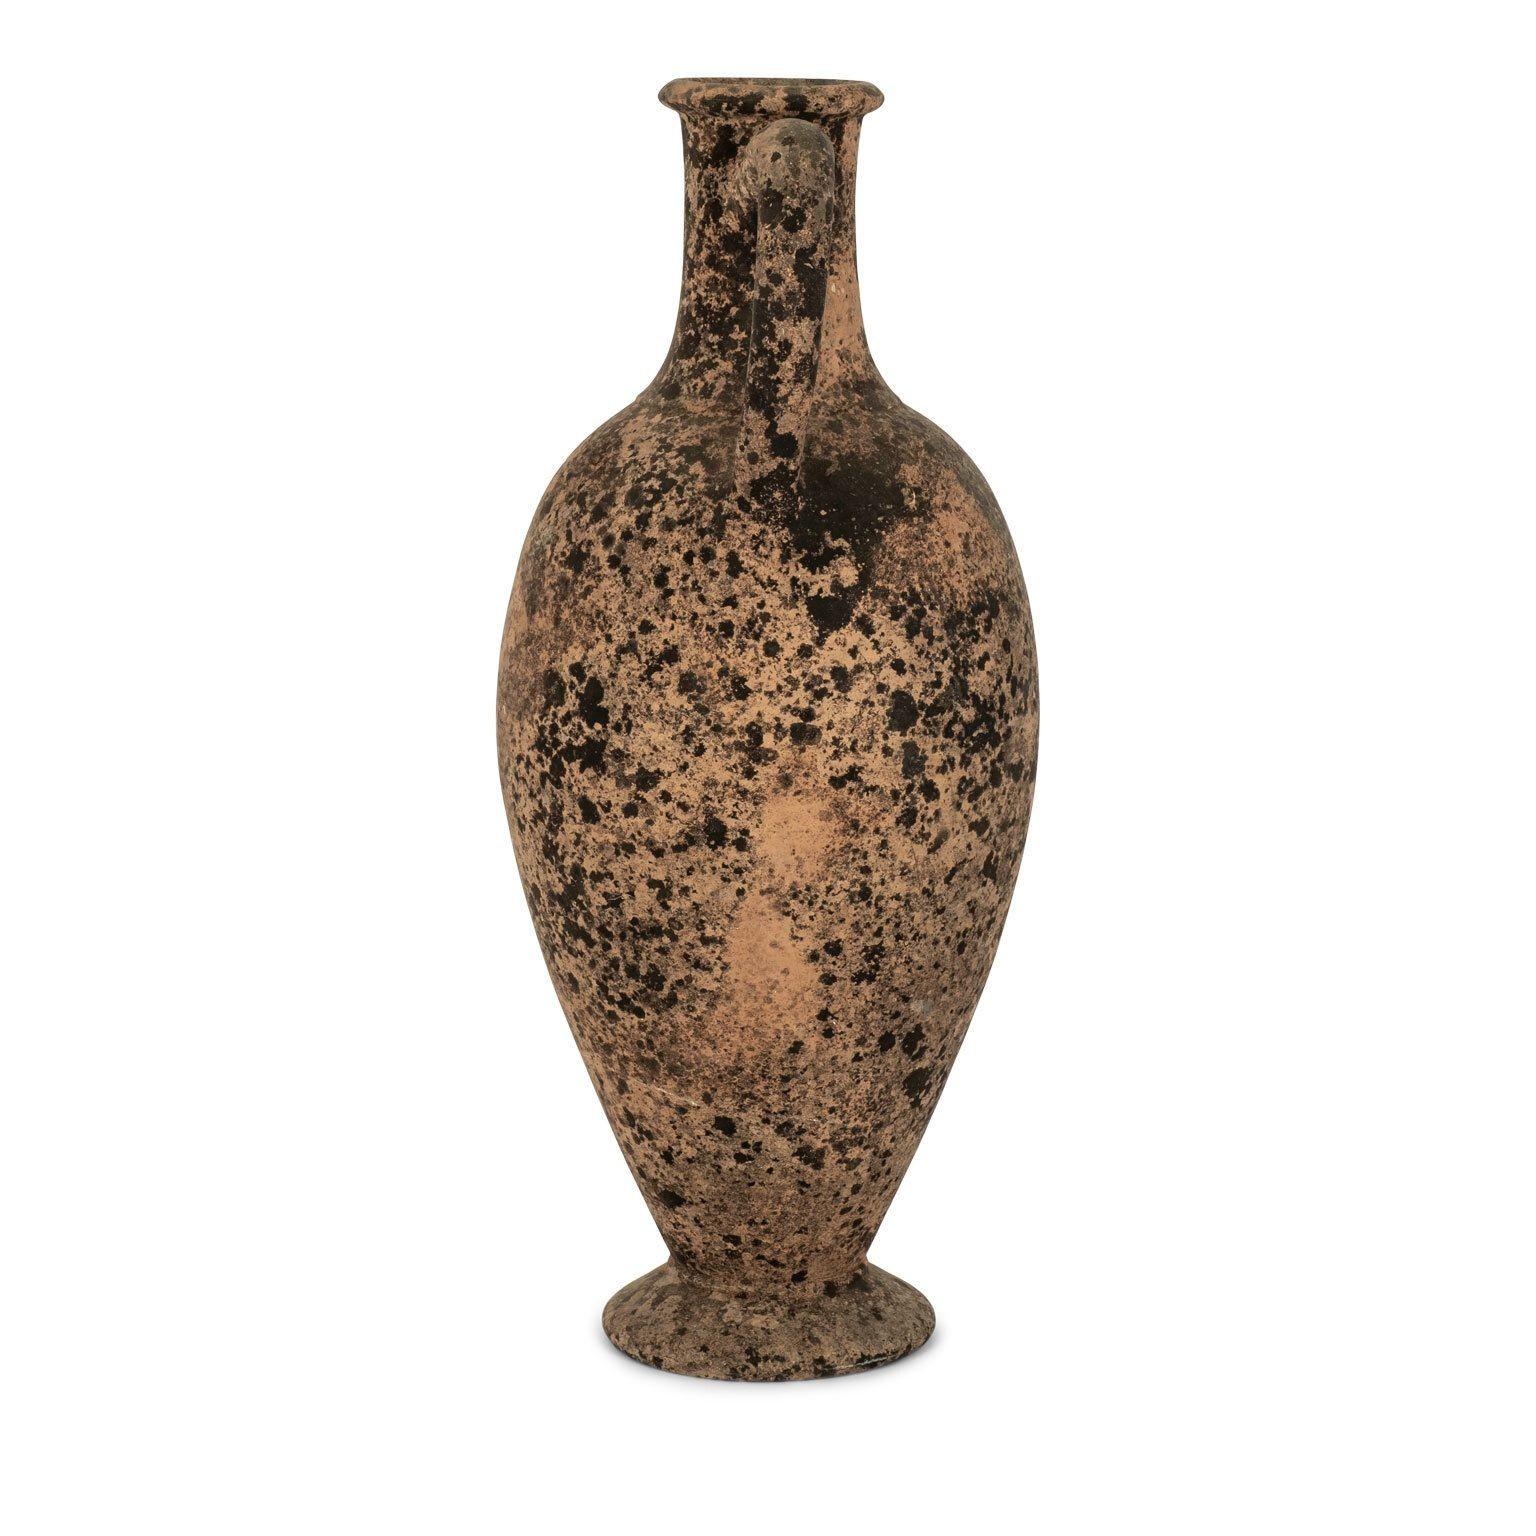 Large-scale vintage terracotta urn from Italy.